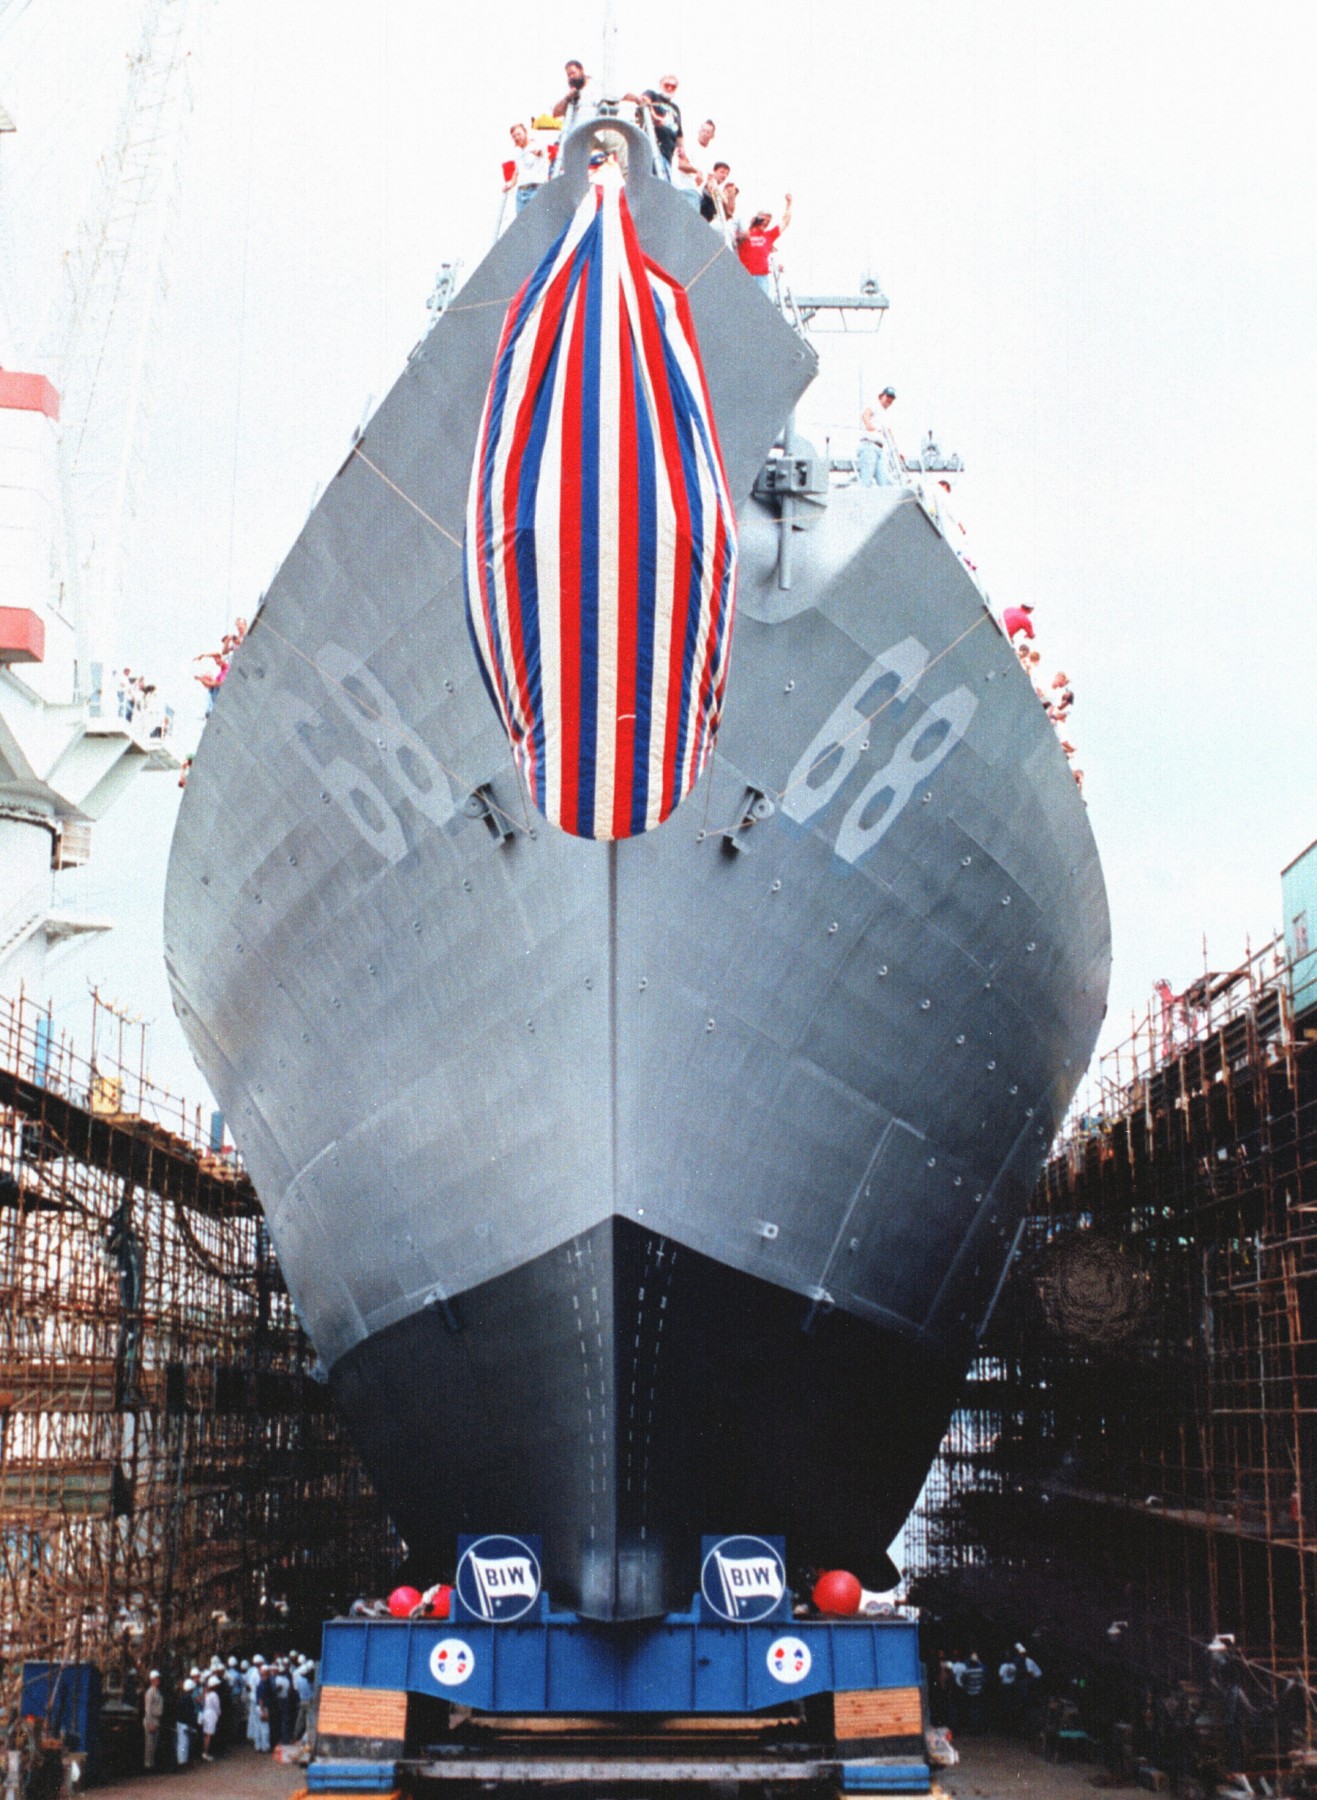 ddg-68 uss the sullivans guided missile destroyer arleigh burke class aegis 03 launching christening ceremony bath maine